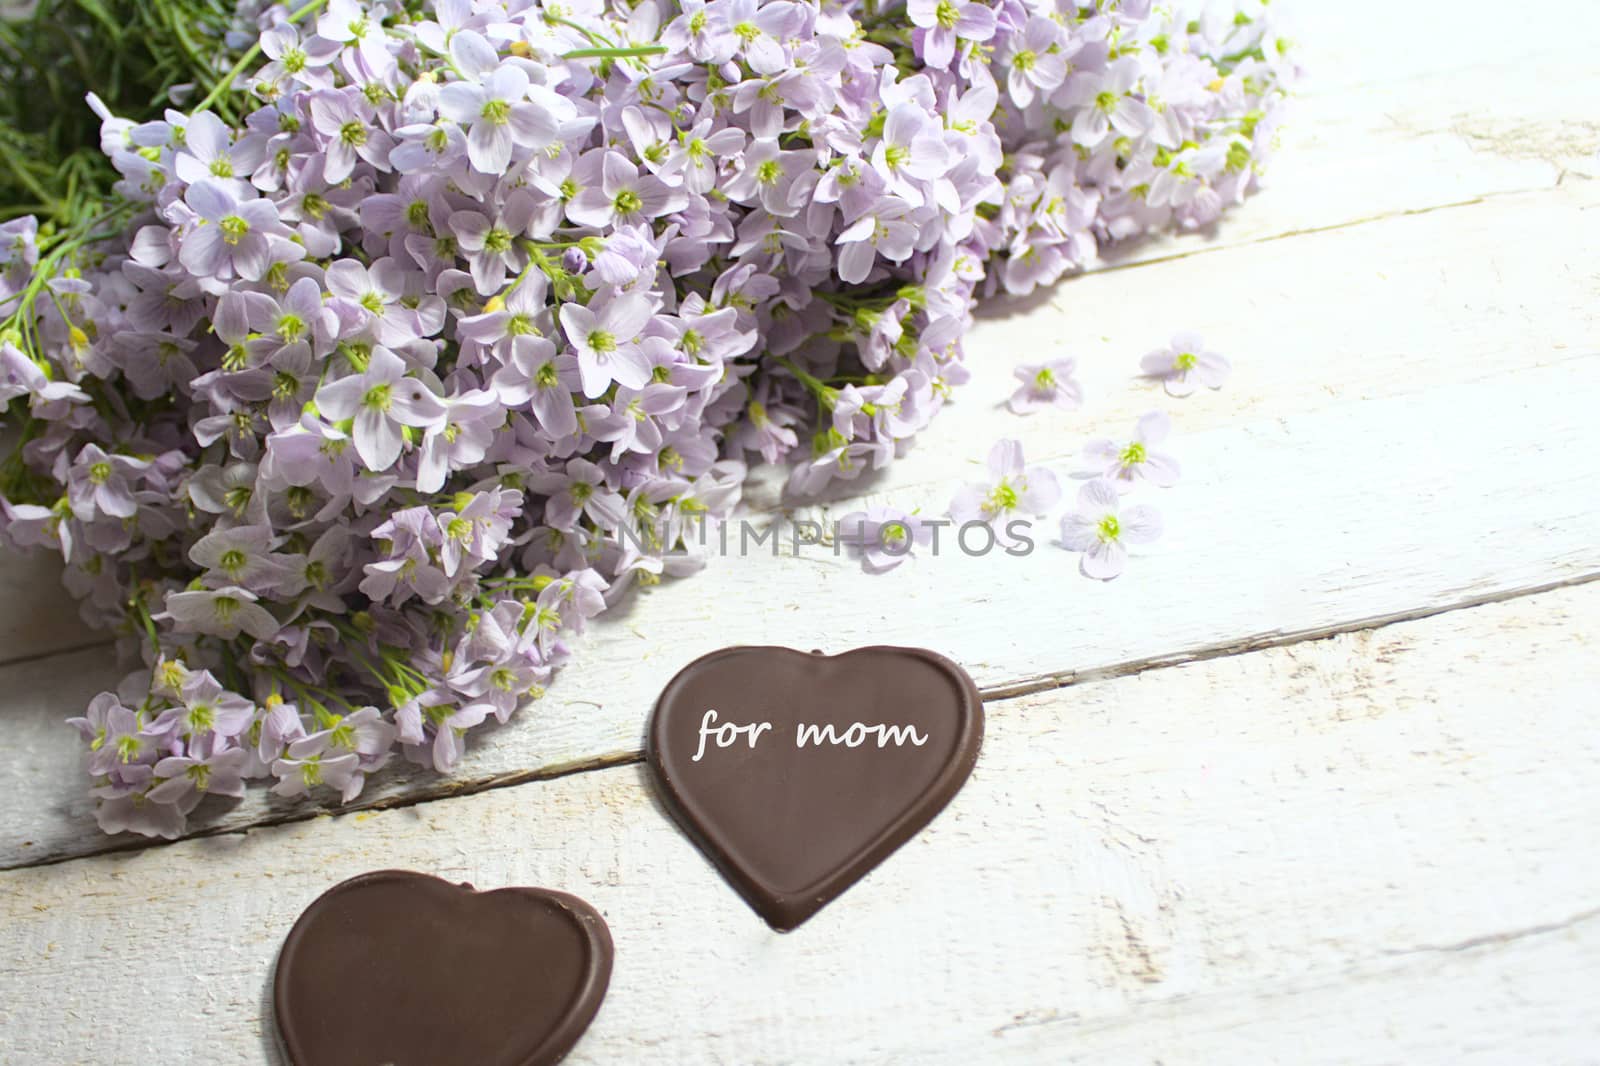 cuckoo flowers and chocolate hearts by martina_unbehauen